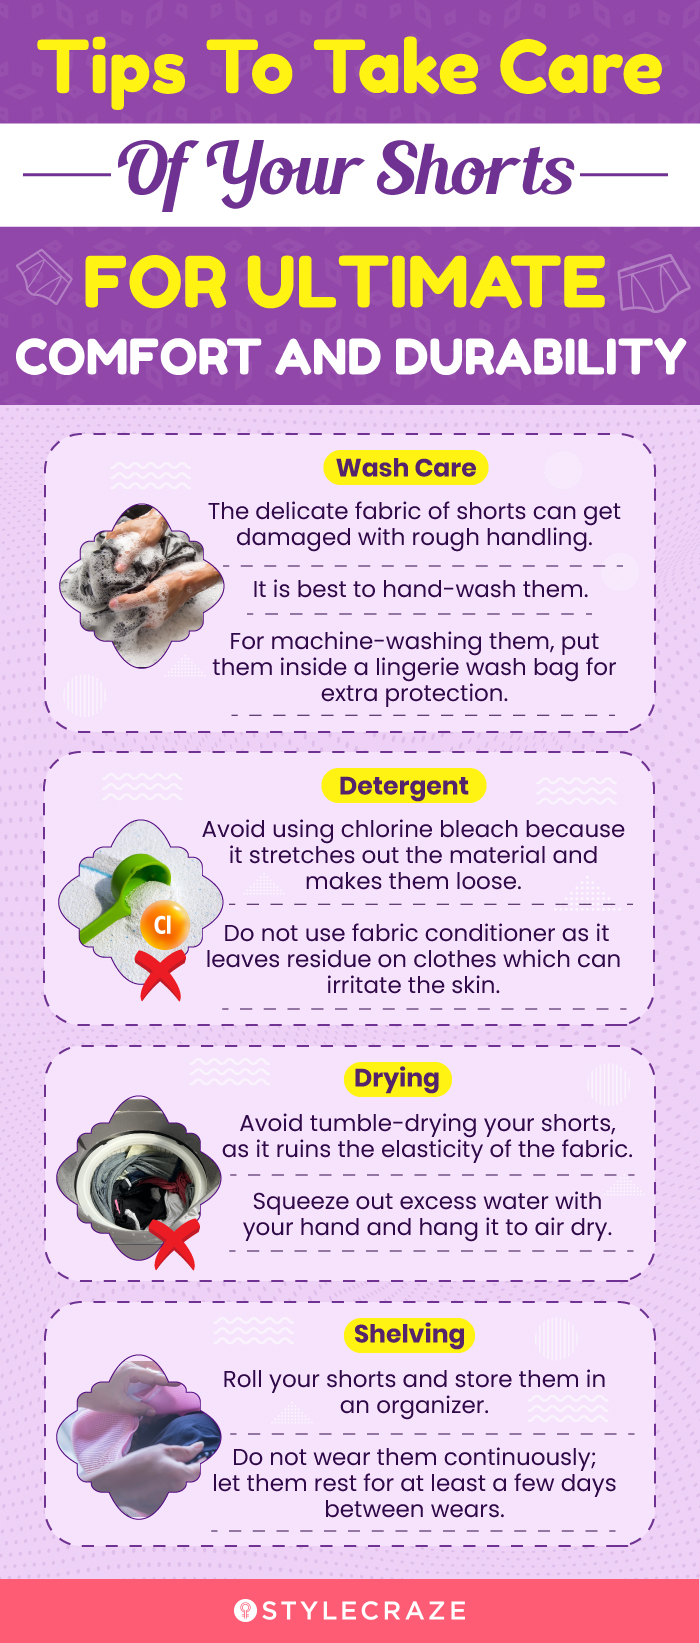 Tips To Take Care Of Your Shorts For Ultimate Comfort and Durability